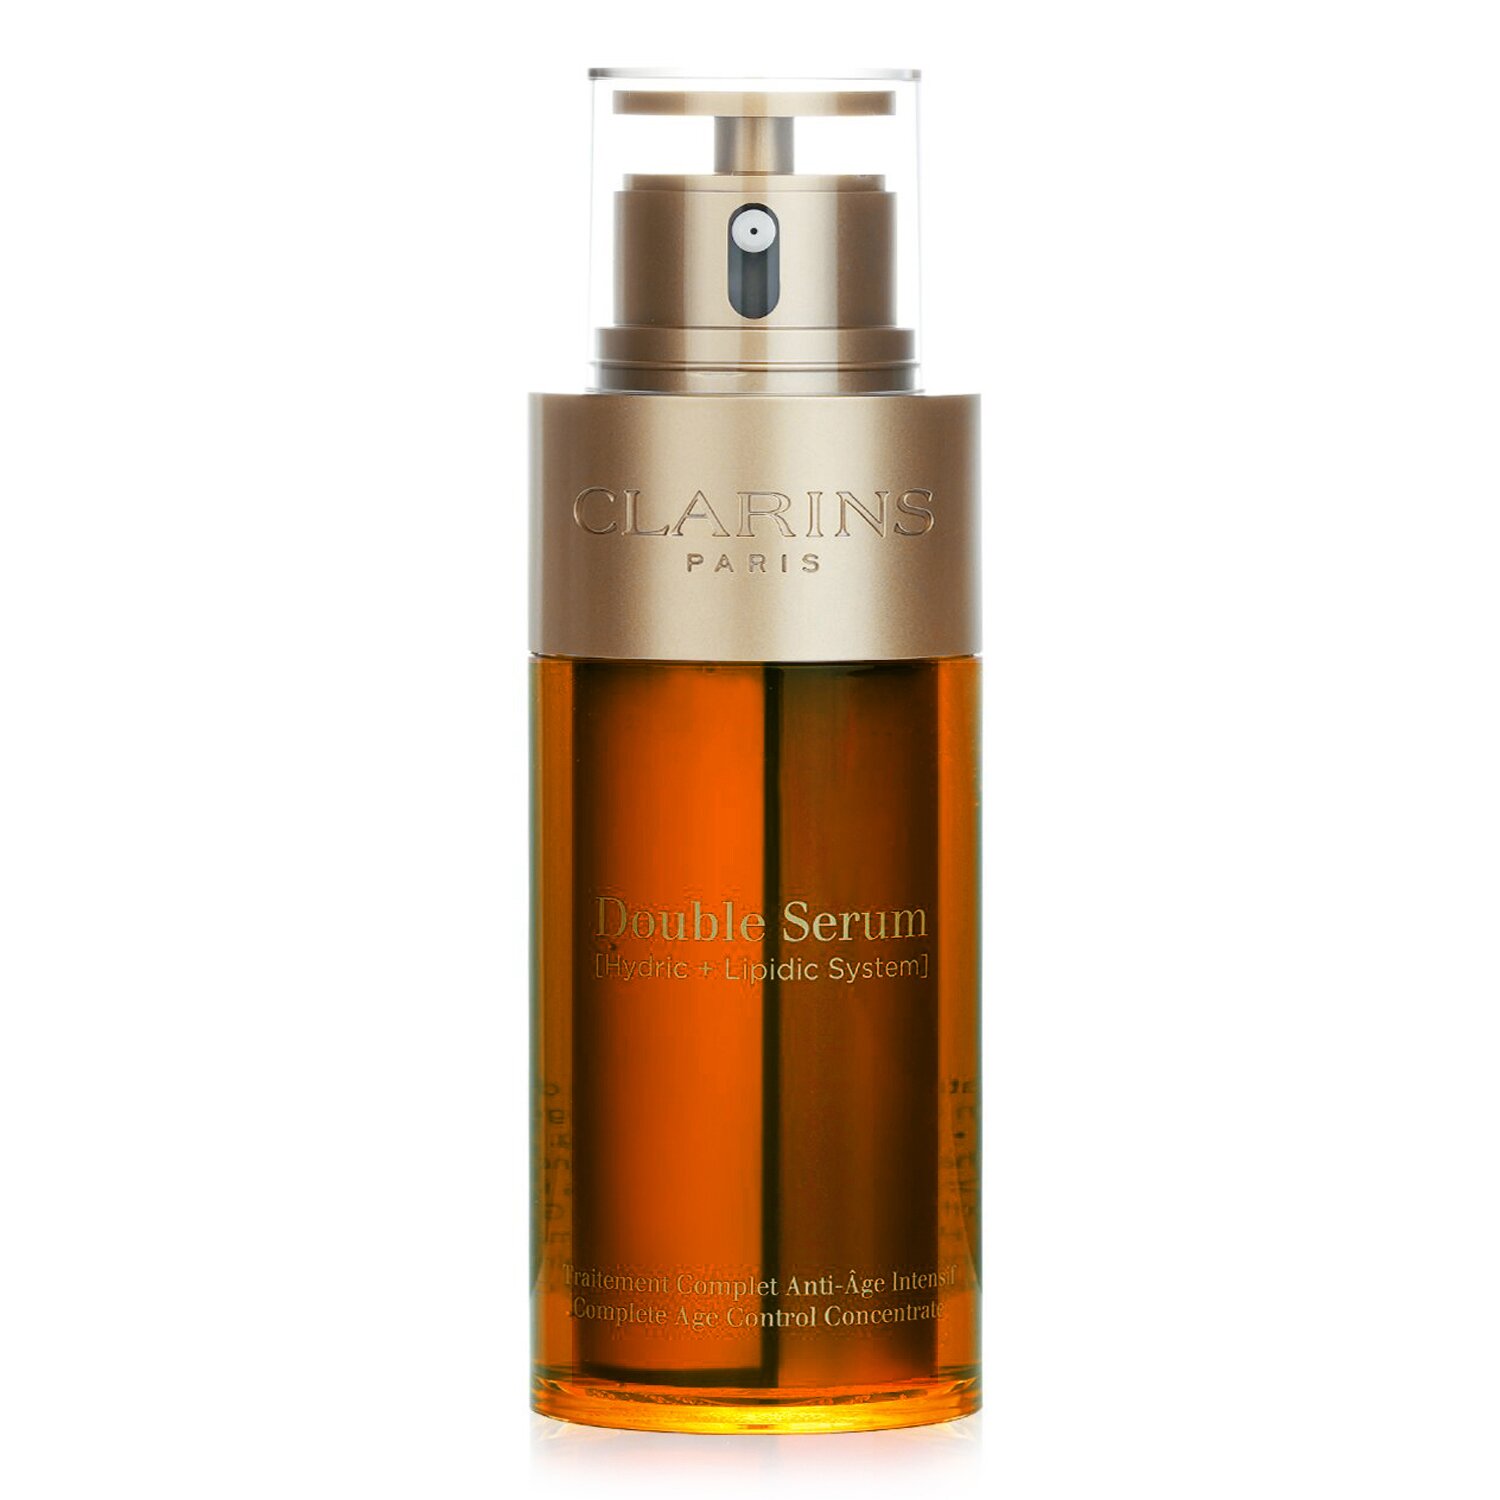 Clarins Double Serum (Hydric + Lipidic System) Complete Age Control Concentrate (Deluxe Edition) 75ml/2.5oz